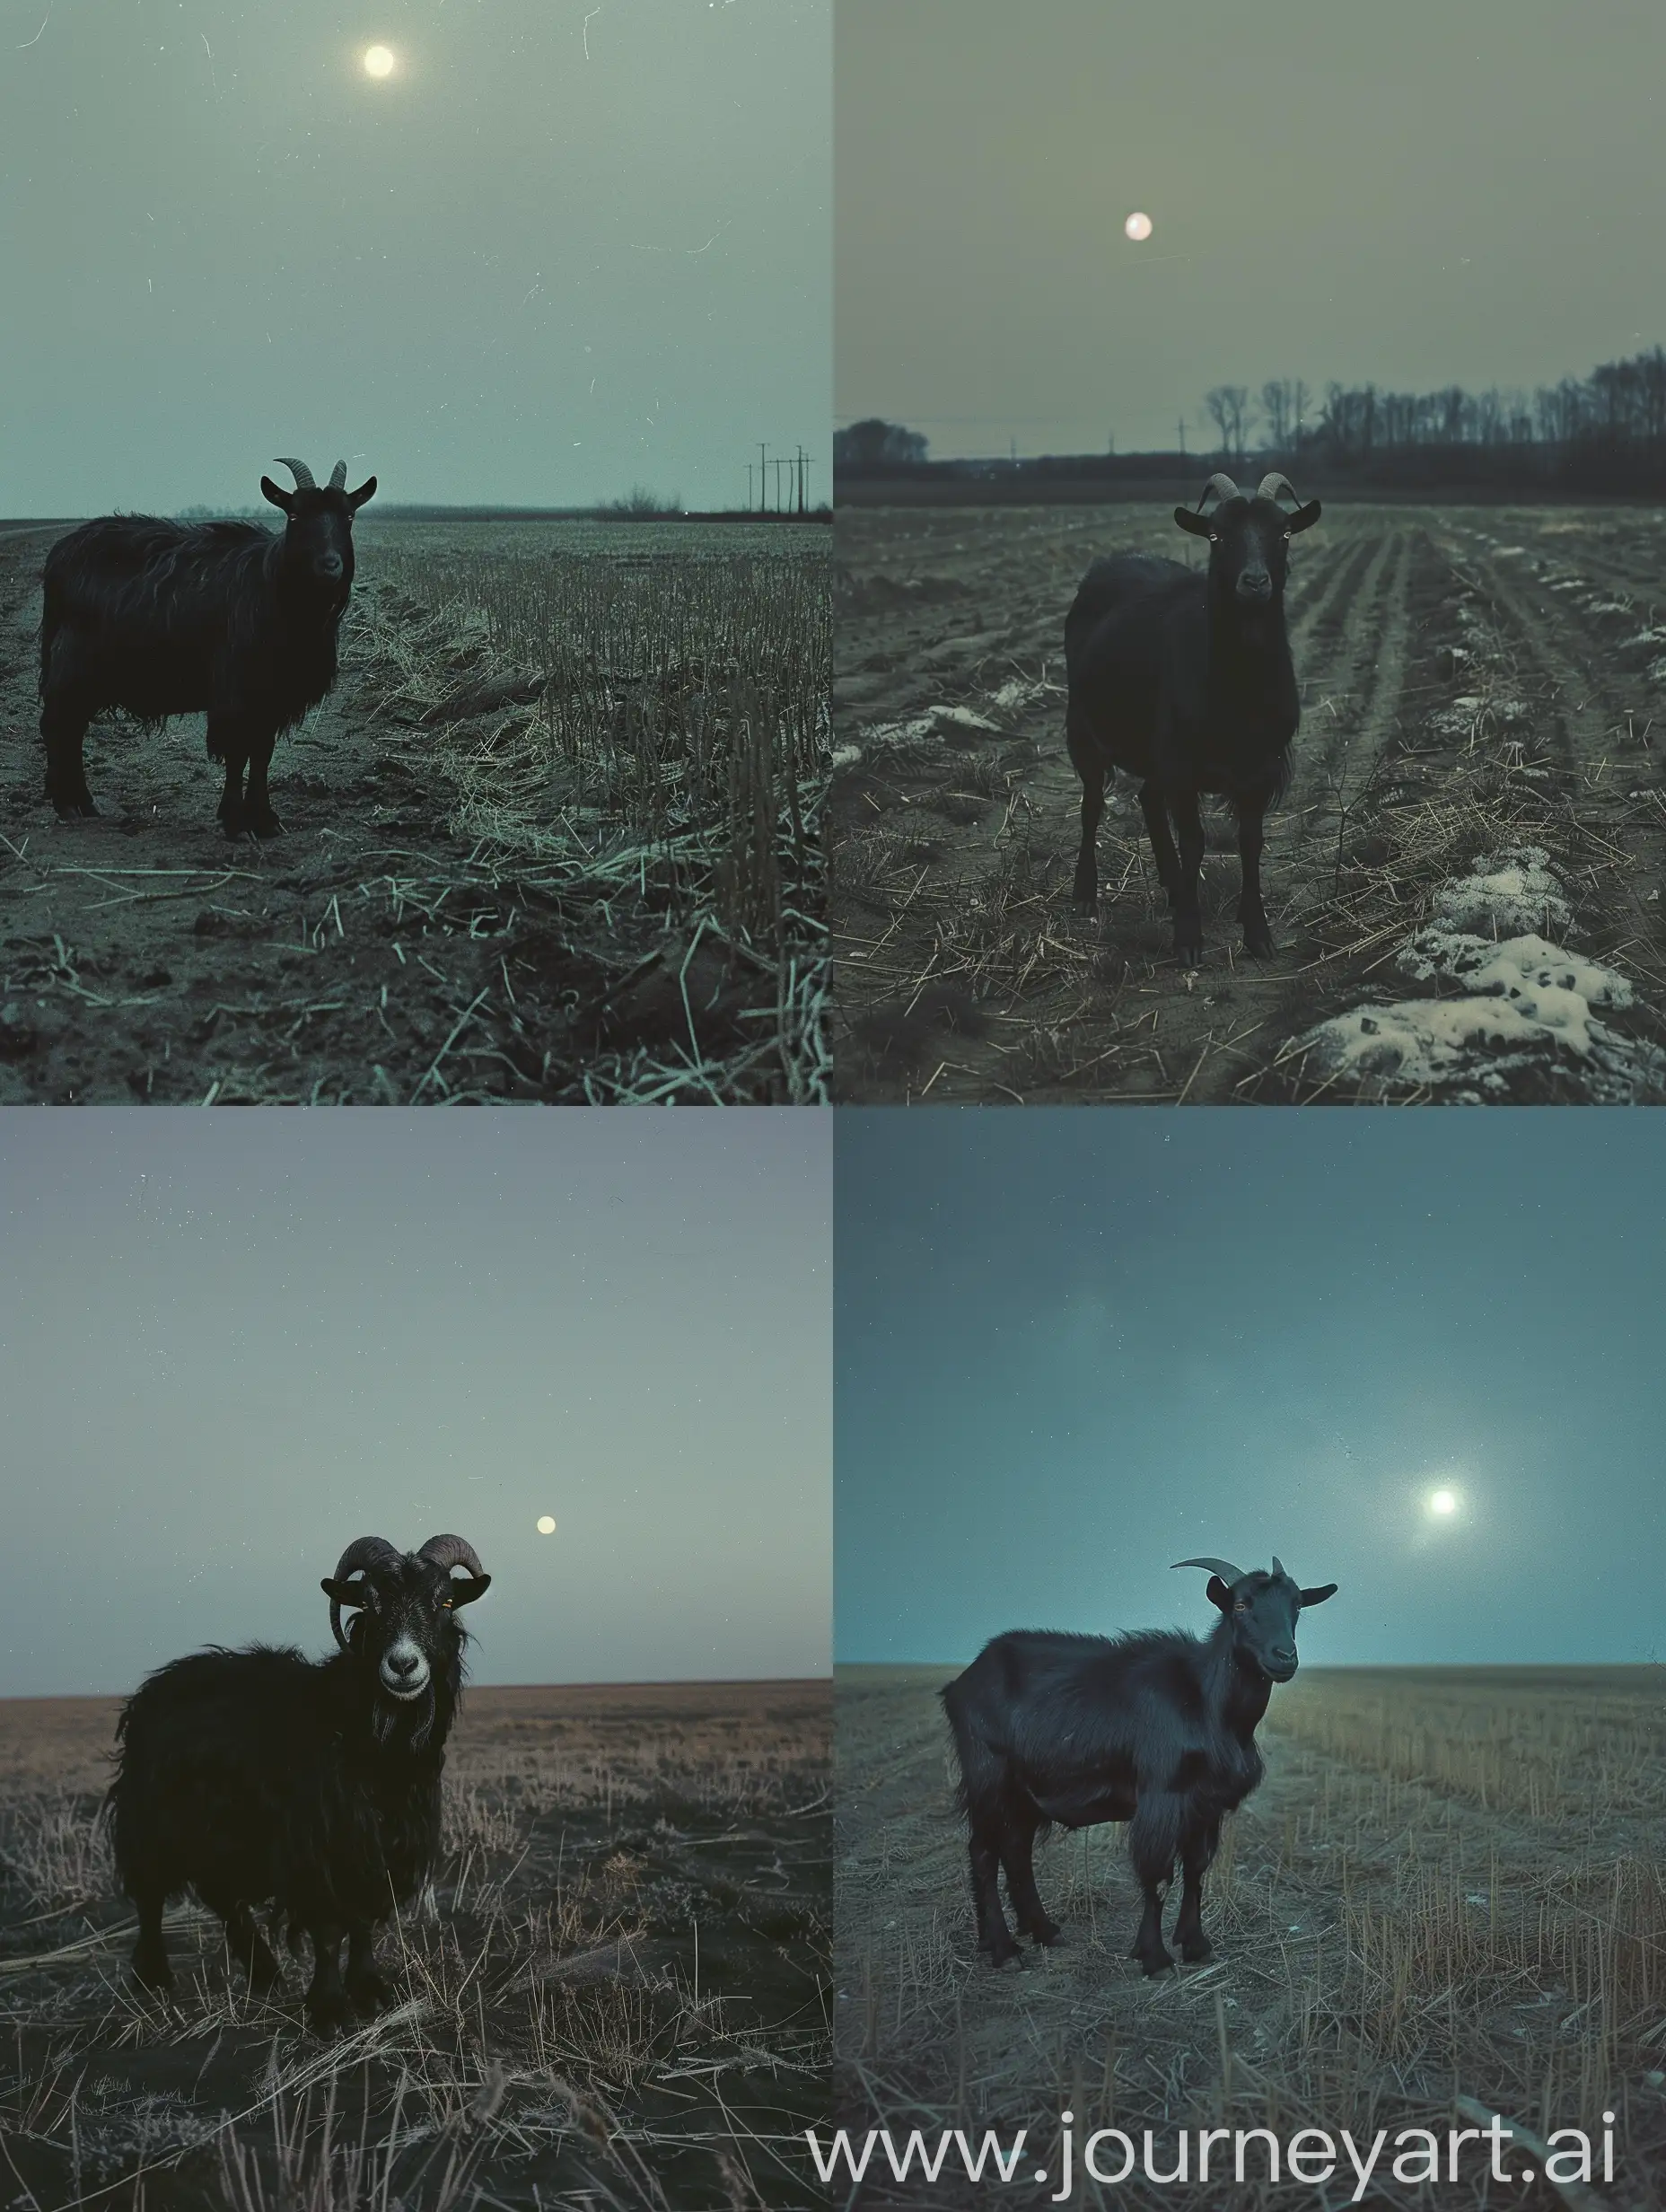 Capture the unsettling presence of a black goat, reminiscent of Black Phillip, amidst a desolate, moonlit field. Utilize the cinematic style of Ari Aster to enhance the atmospheric horror and psychological tension, emphasizing the enigmatic and malevolent nature of the goat, Morbid Mysticism, slavic folk horror, occult core,  expired 35mm film